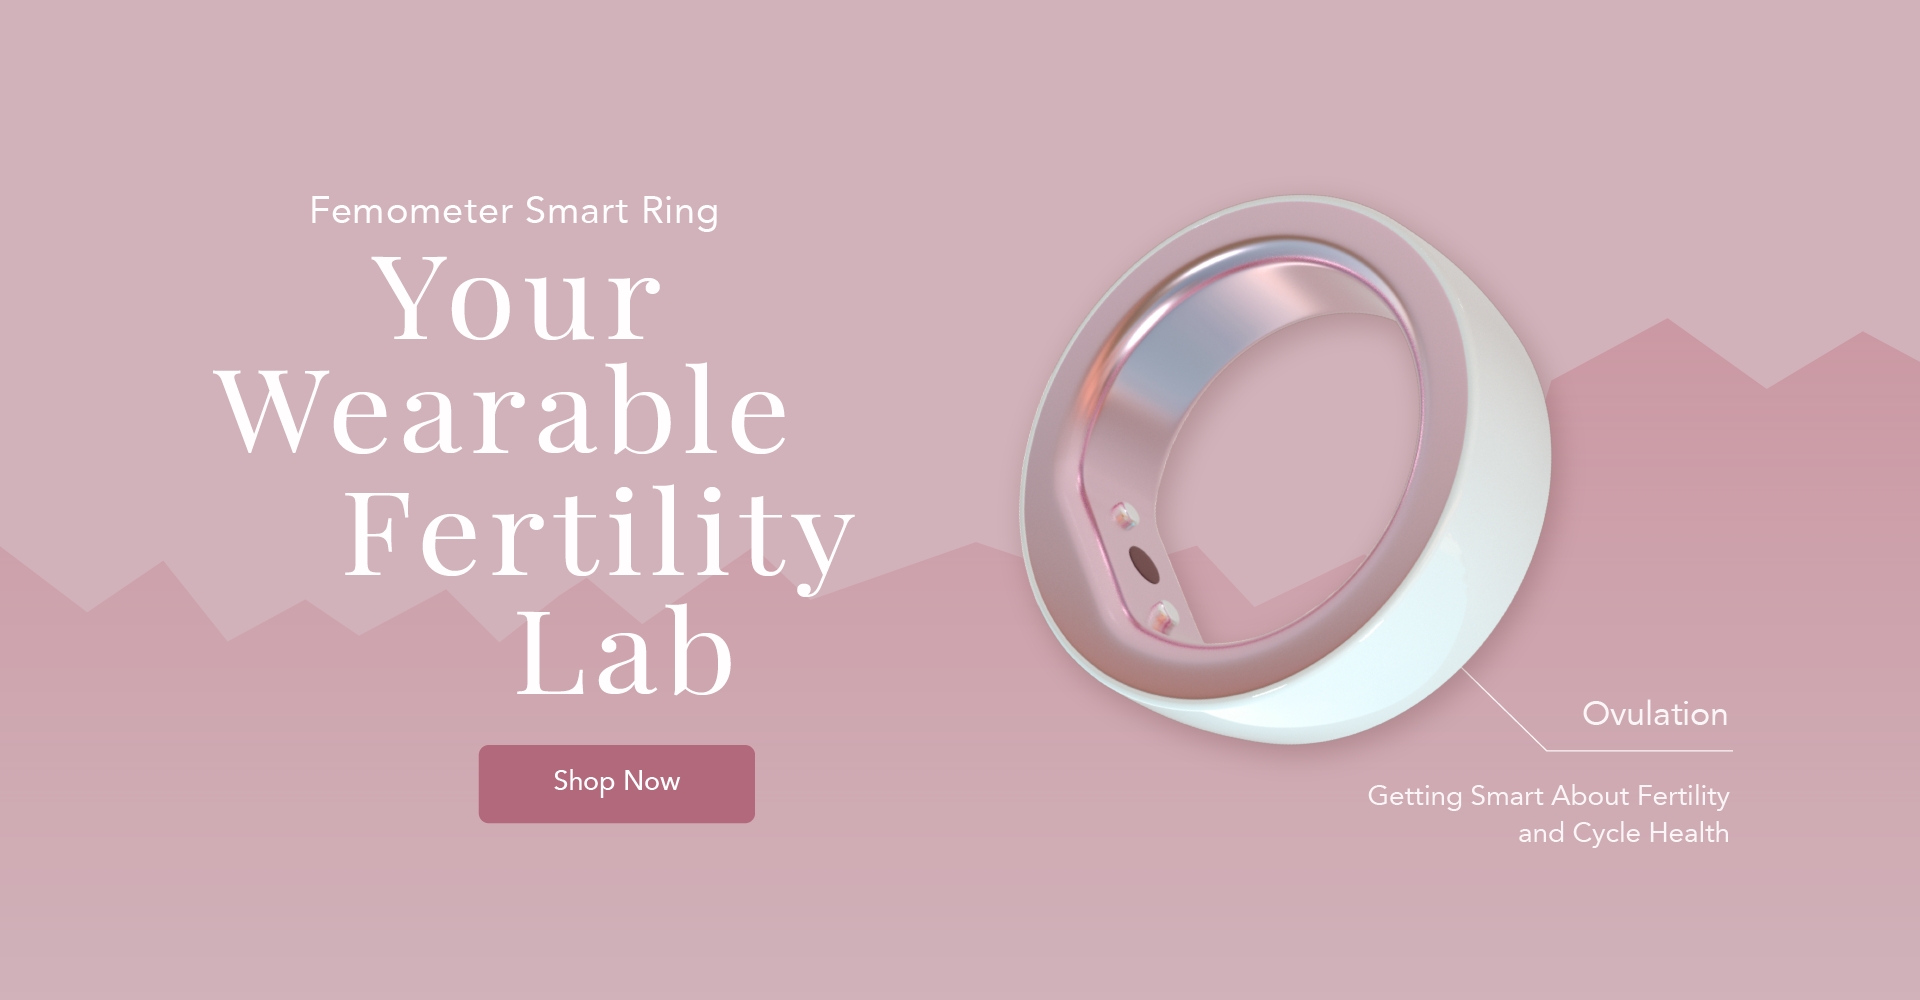 Femometer smart ring your wearable fertility lab pc